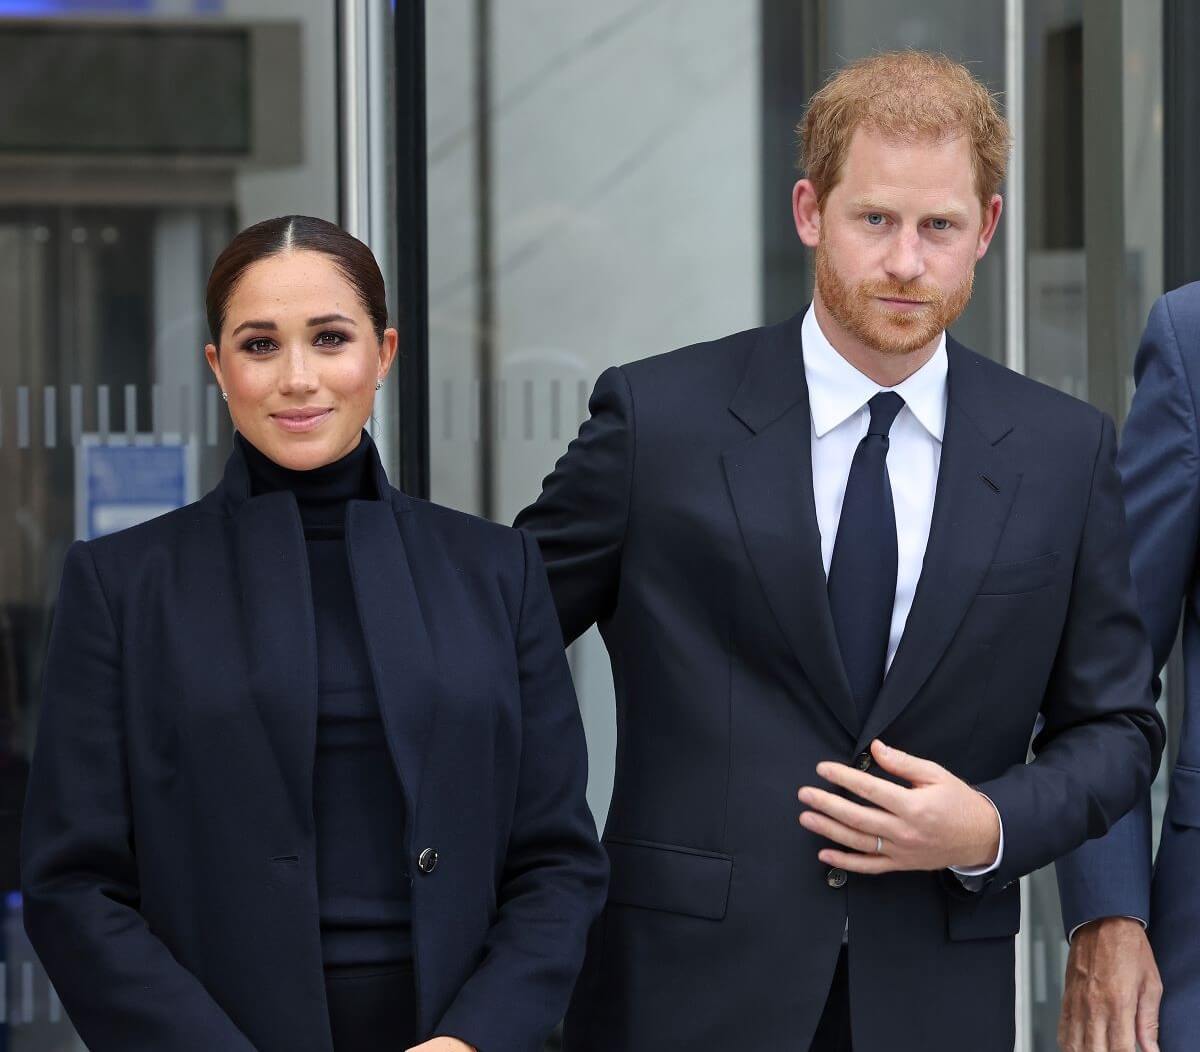 Meghan Markle, who an astrologer says wants to 'return to acting' but it will put a strain on her relationship with Prince Harry visit One World Observatory in New York City